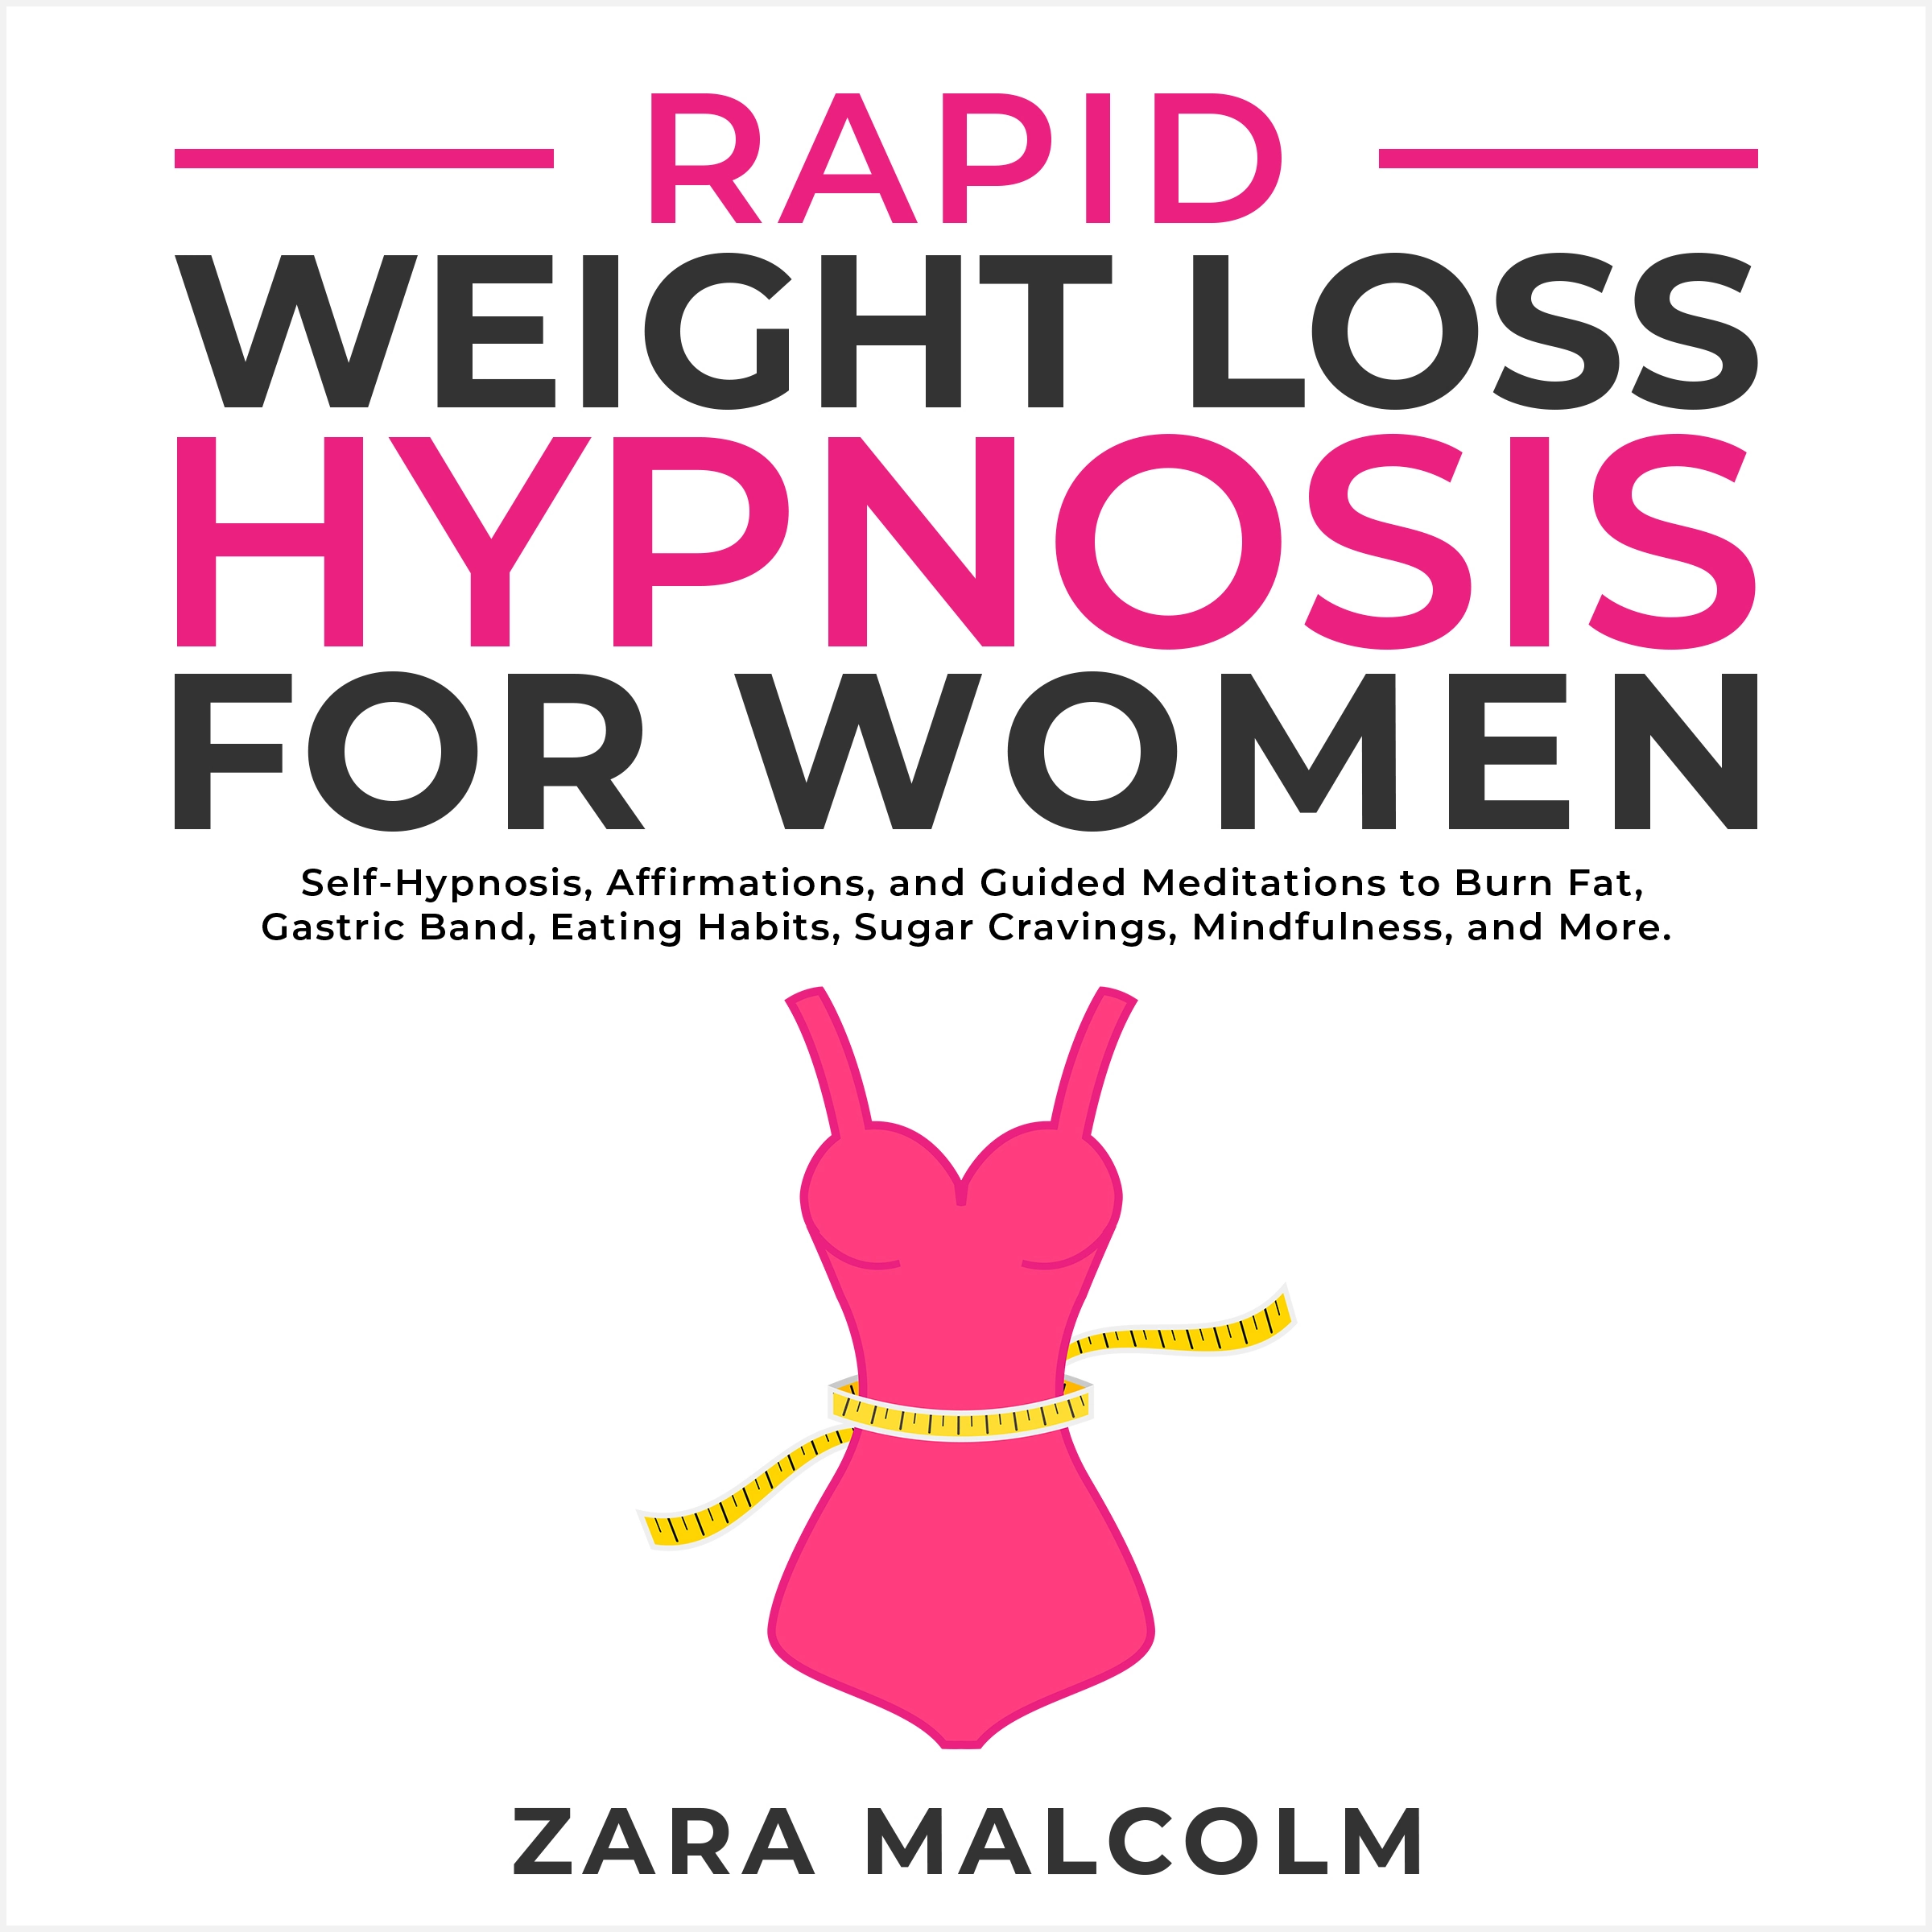 Rapid Weight Loss Hypnosis for Women: Self-Hypnosis, Affirmations, and Guided Meditations to Burn Fat, Gastric Band, Eating Habits, Sugar Cravings, Mindfulness, and More. Audiobook by Zara Malcolm